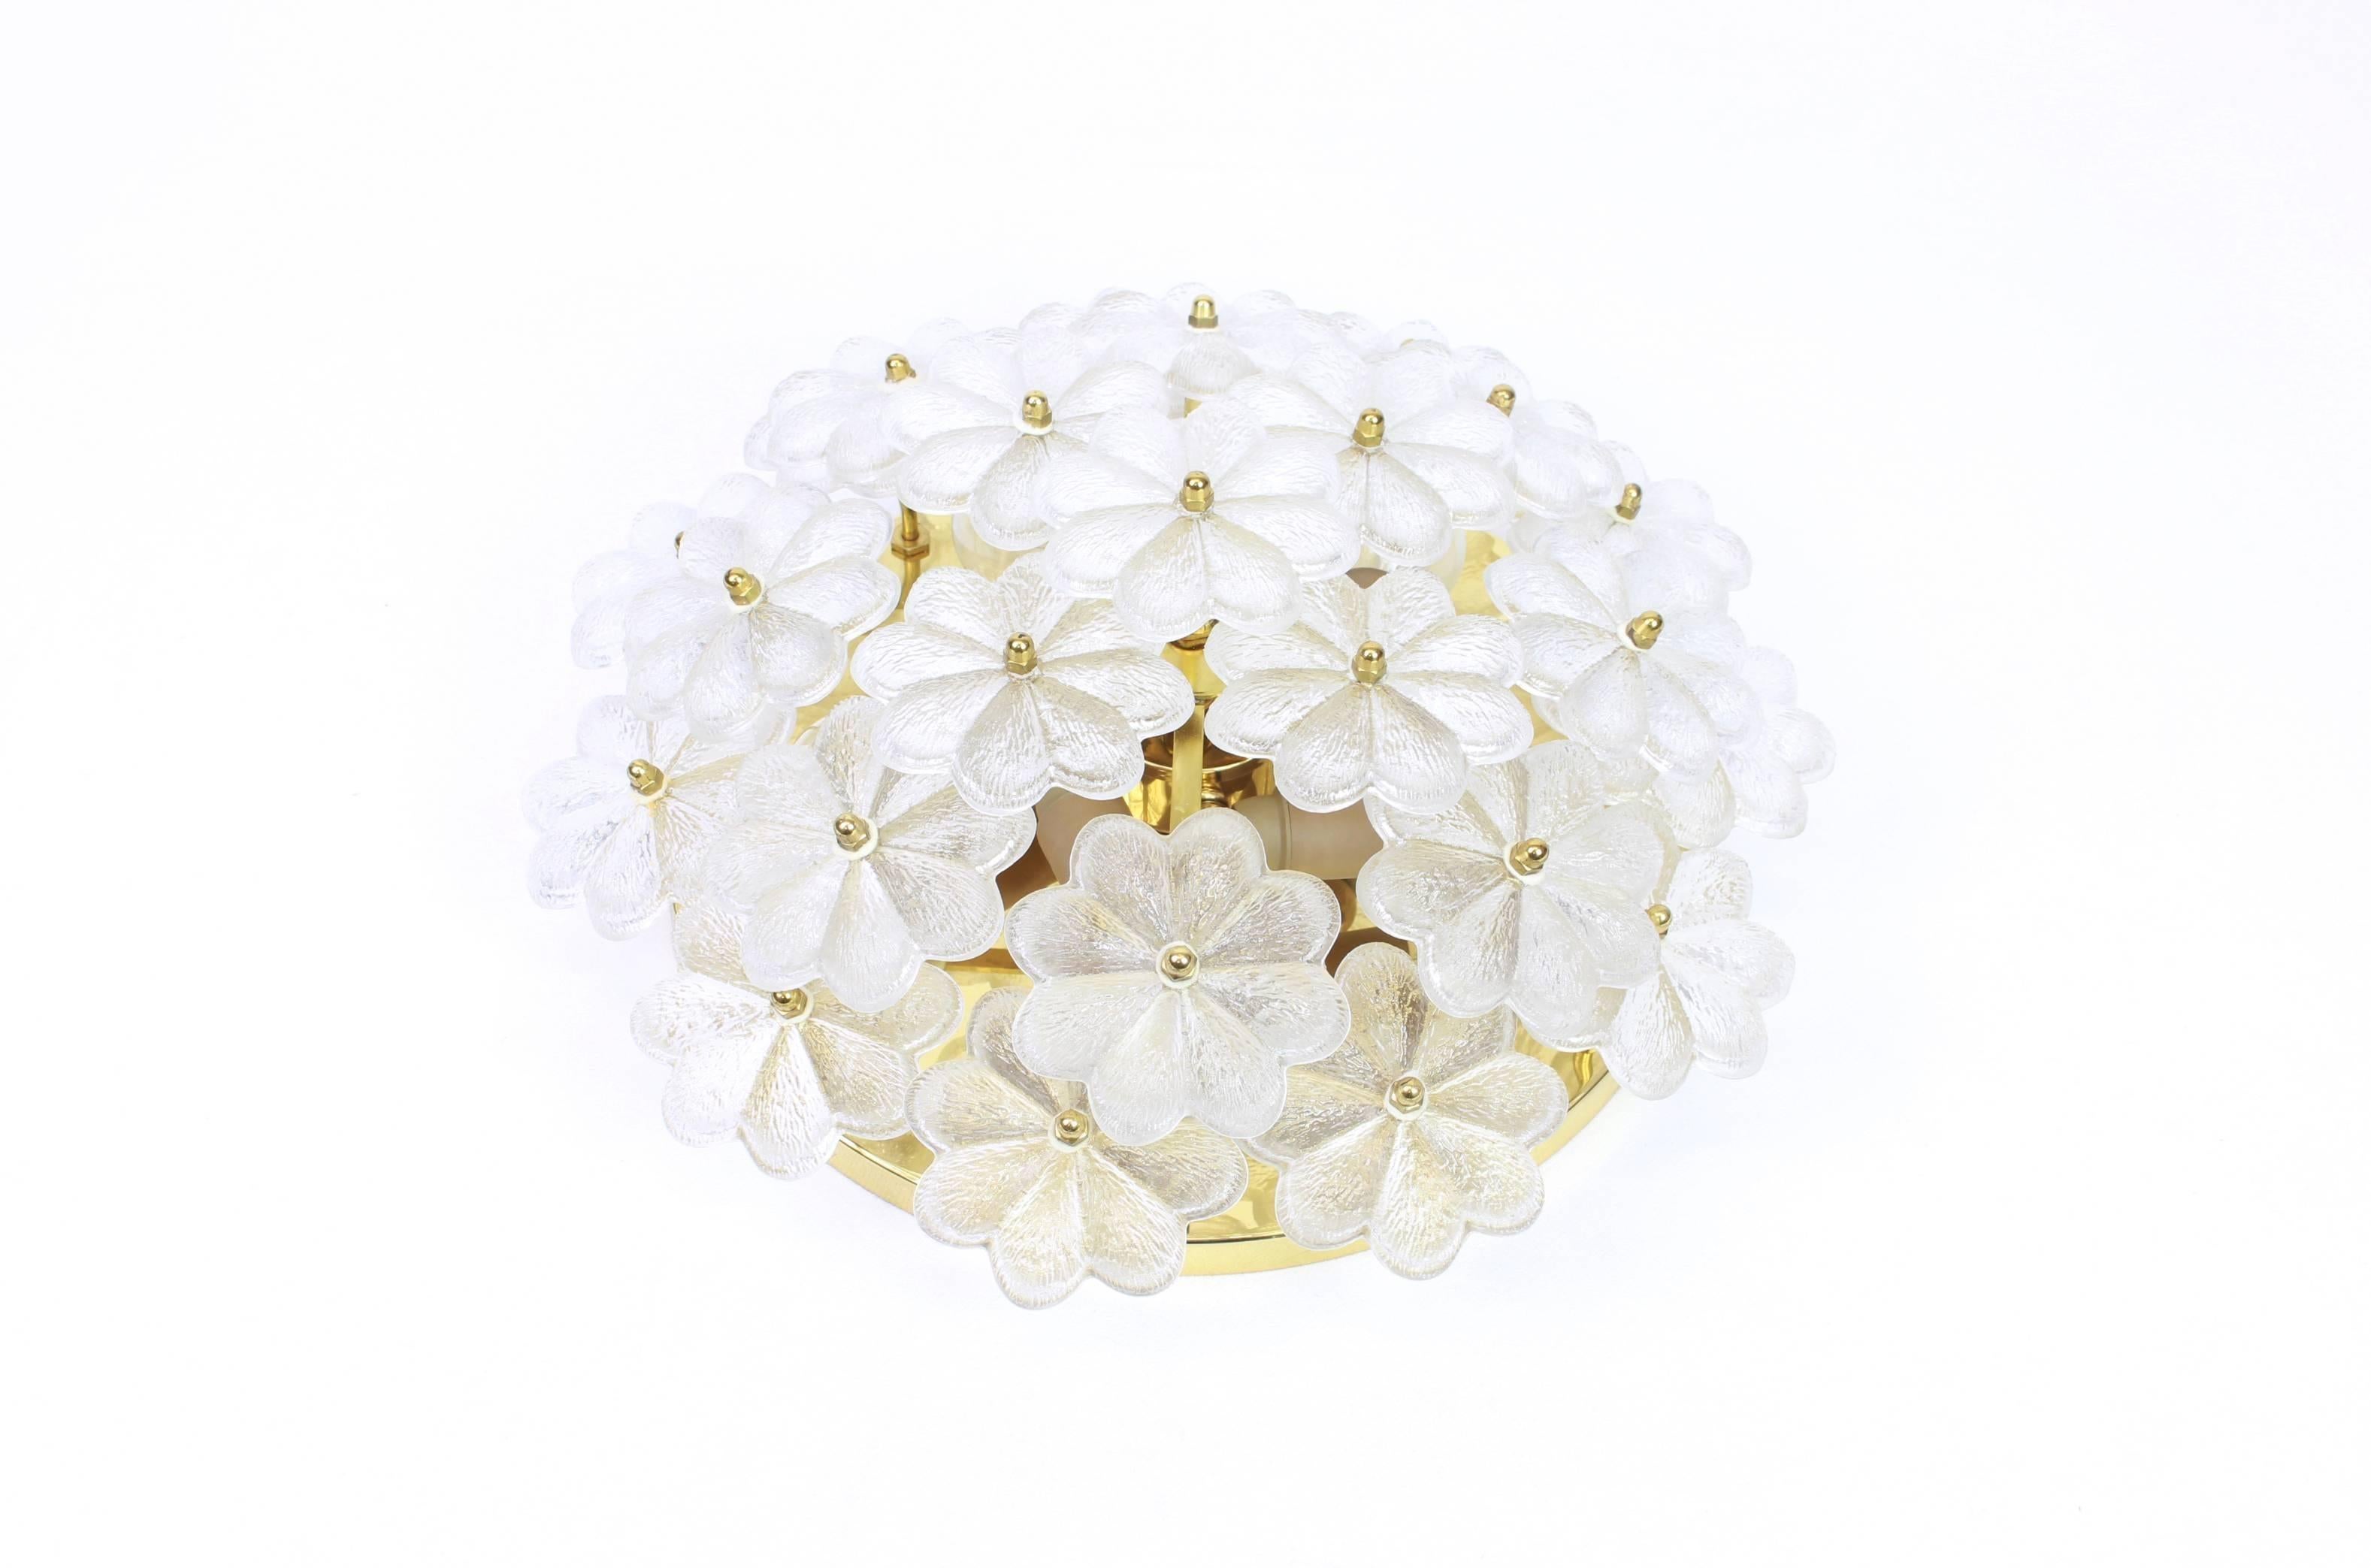 1- Pair of Large Murano Ice Glass Sconces Modernist Wall Fixtures, Germany, 1960s - LU2130320228062
2- Stunning Murano Glass Flower Wall Light by Ernst Palme, Germany, 1970s - LU2130319024022
3- Pair of Extra Large Murano Ice Glass Sconces